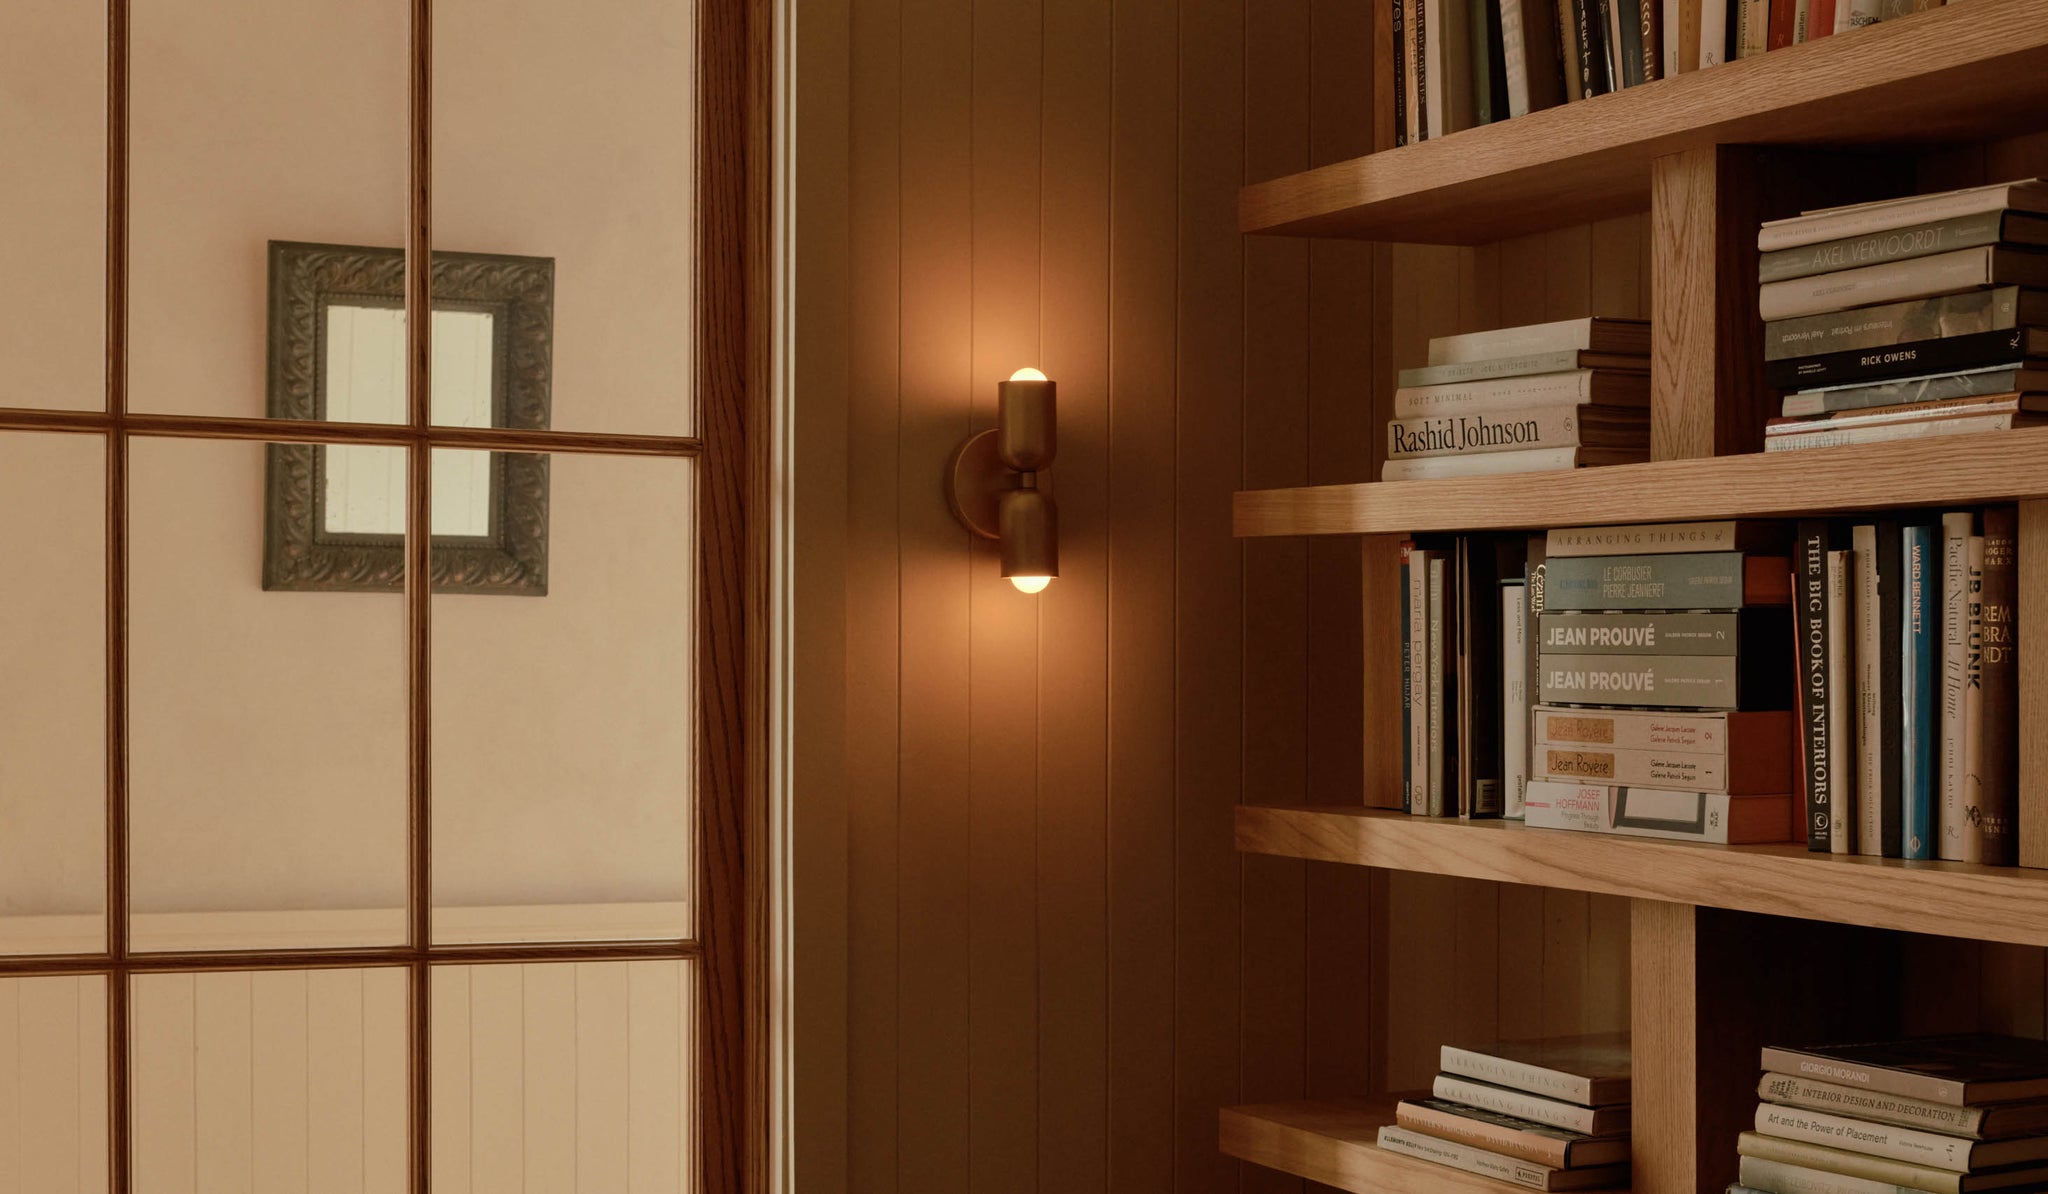 Library LED 4 inch Library Brass Wall Sconce Wall Light